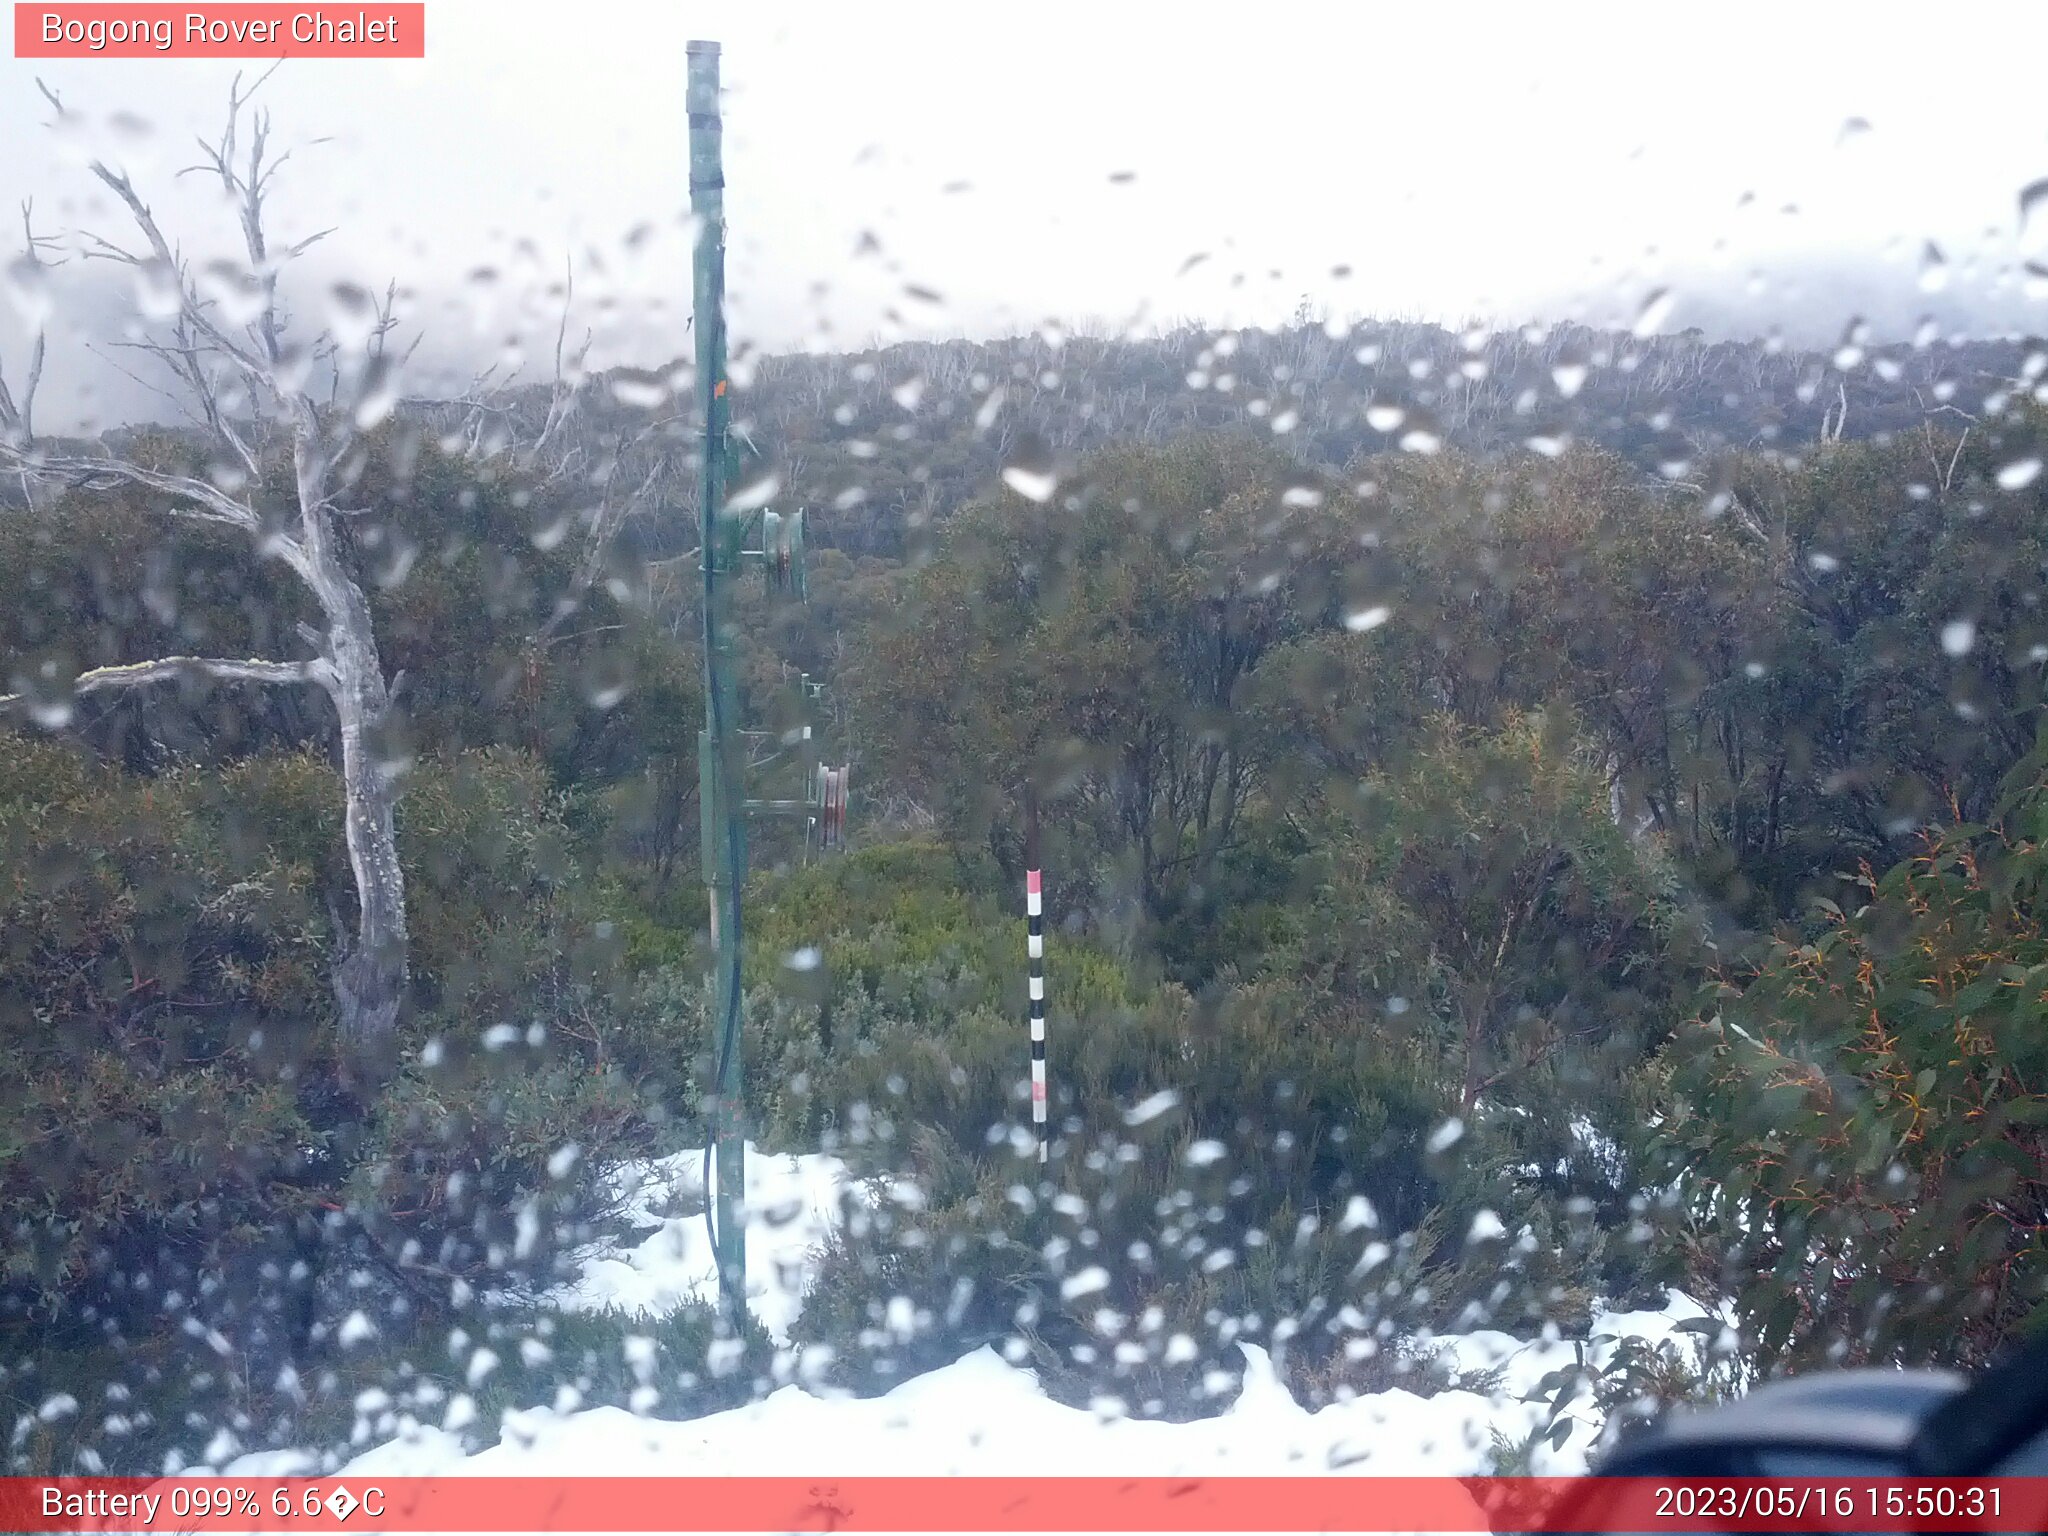 Bogong Web Cam 3:50pm Tuesday 16th of May 2023